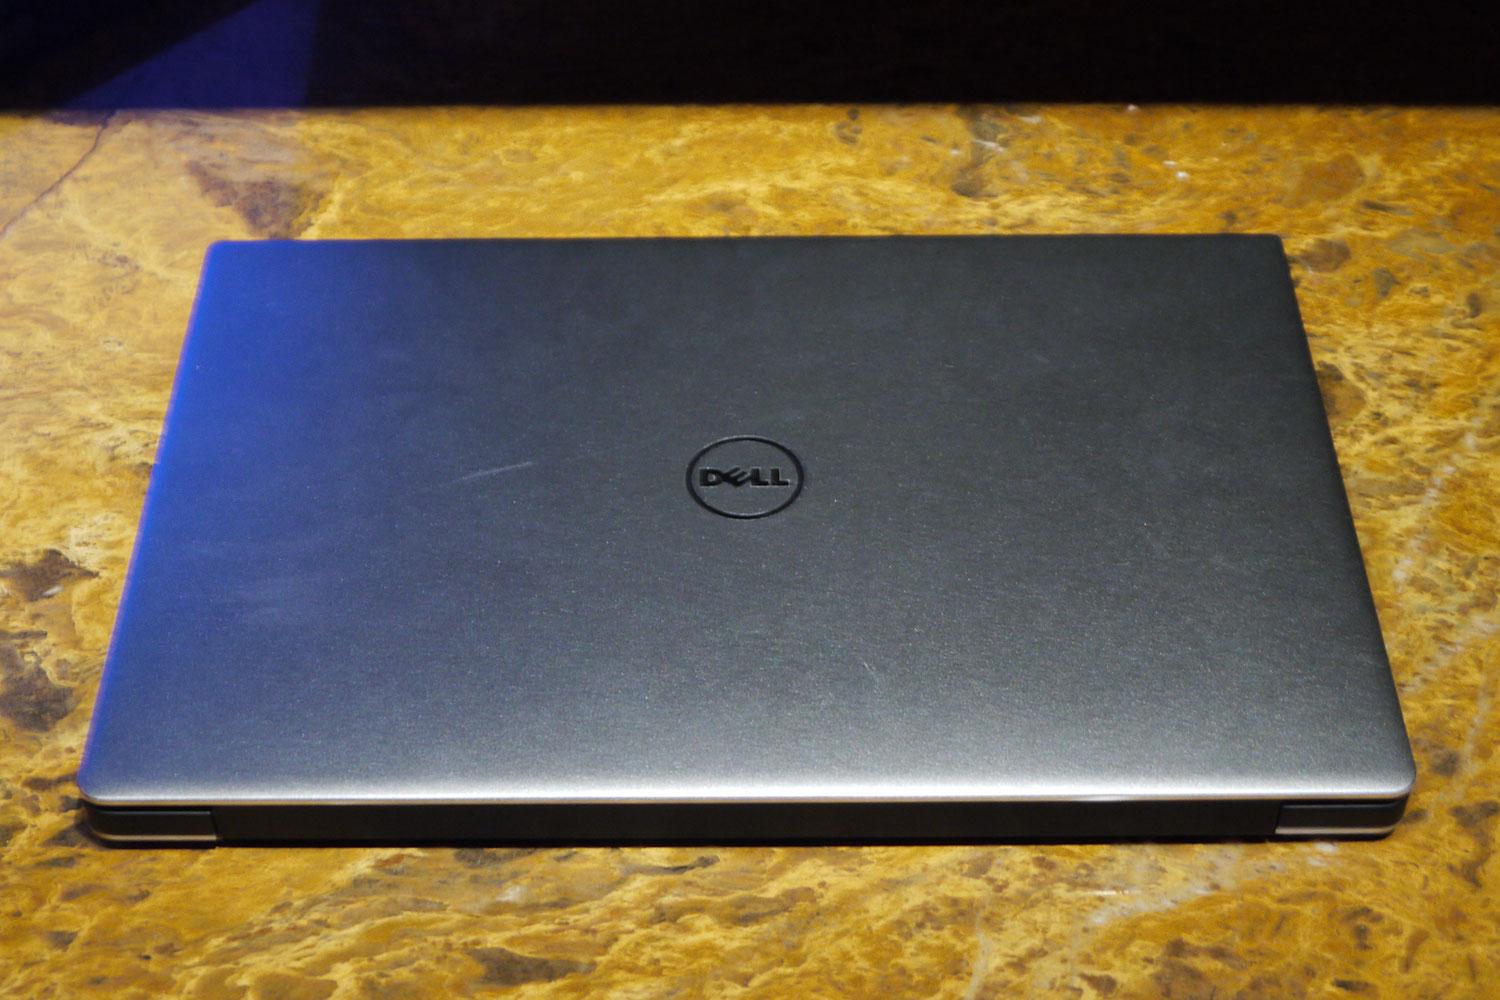 dell xps 13 laptop has a screen with virtually no bezel hands on p1100296